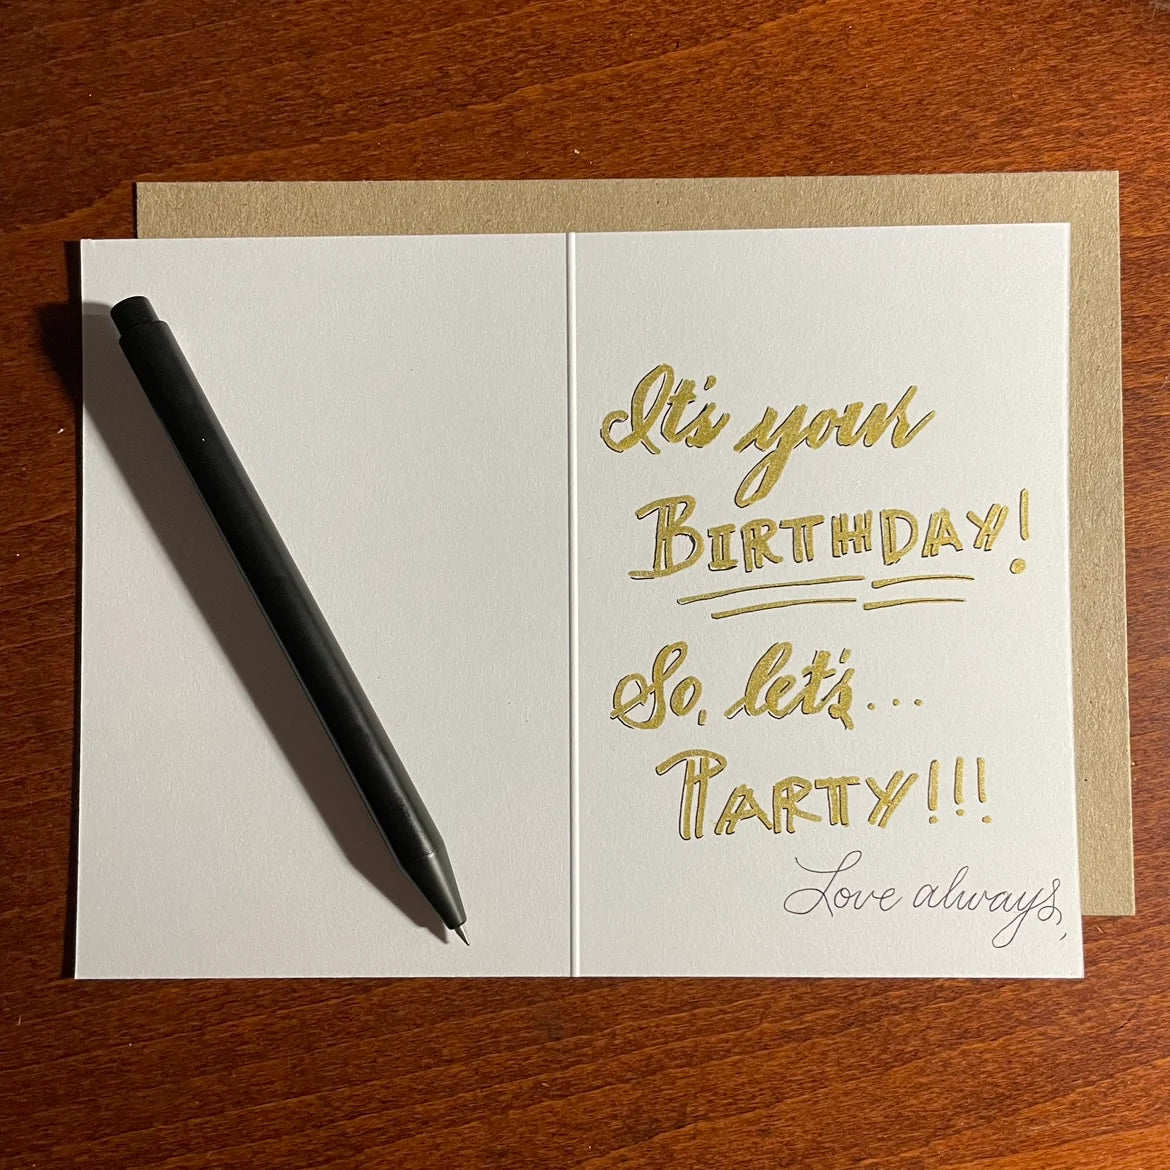 Add a handwritten note to your greeting cards | "It's your birthday! So, let's party!" - Custom services by Nibs and Scripts